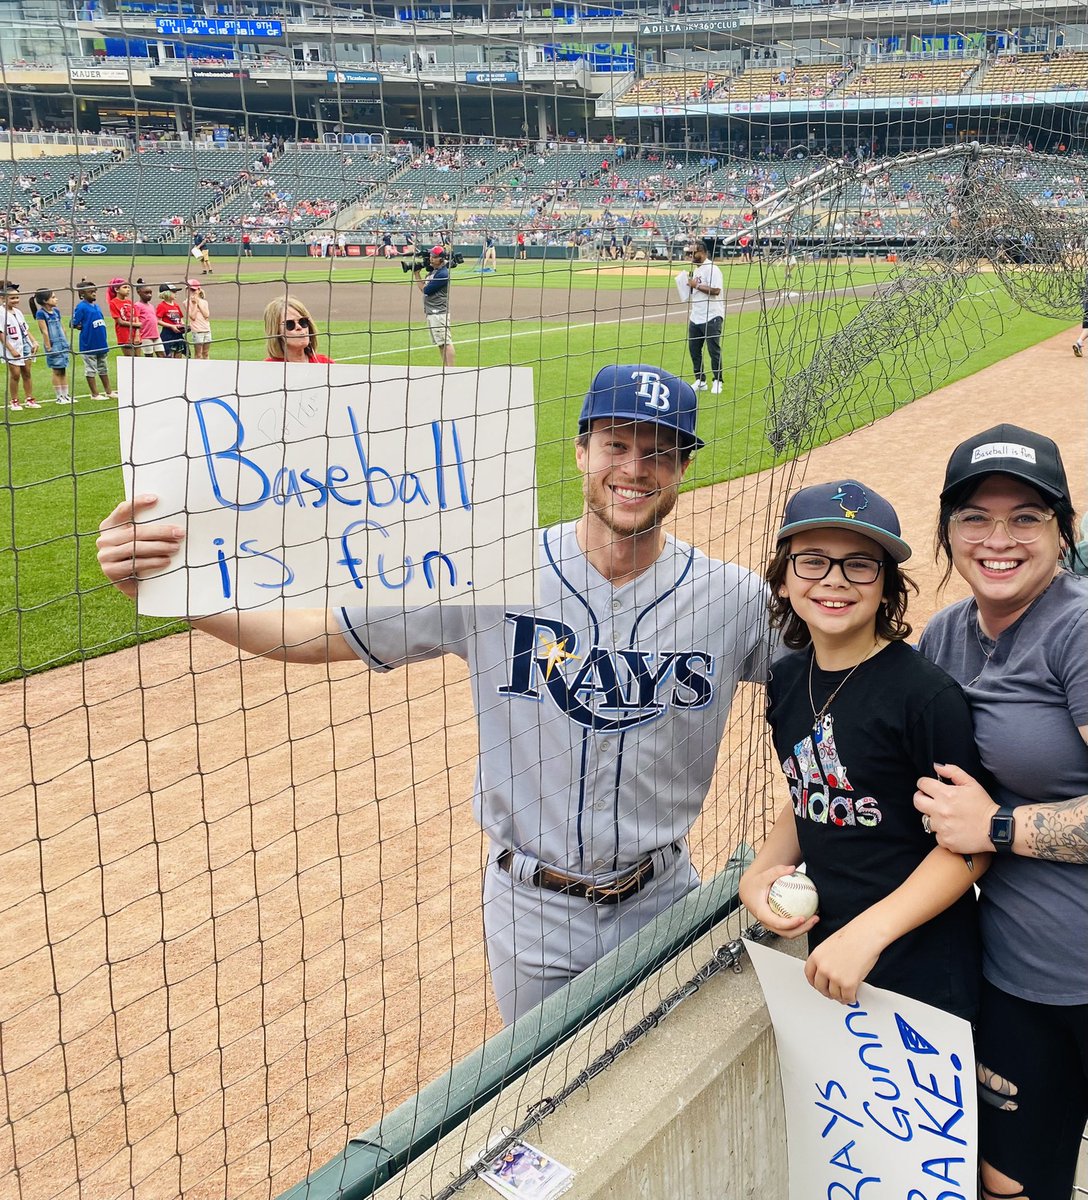 @BaseballisFun__ thank you @Brett_Phillips8 for making my wife and sons day and taking the time to say hi. It was such a special moment as you are her favorite player and it meant the world to both of them.